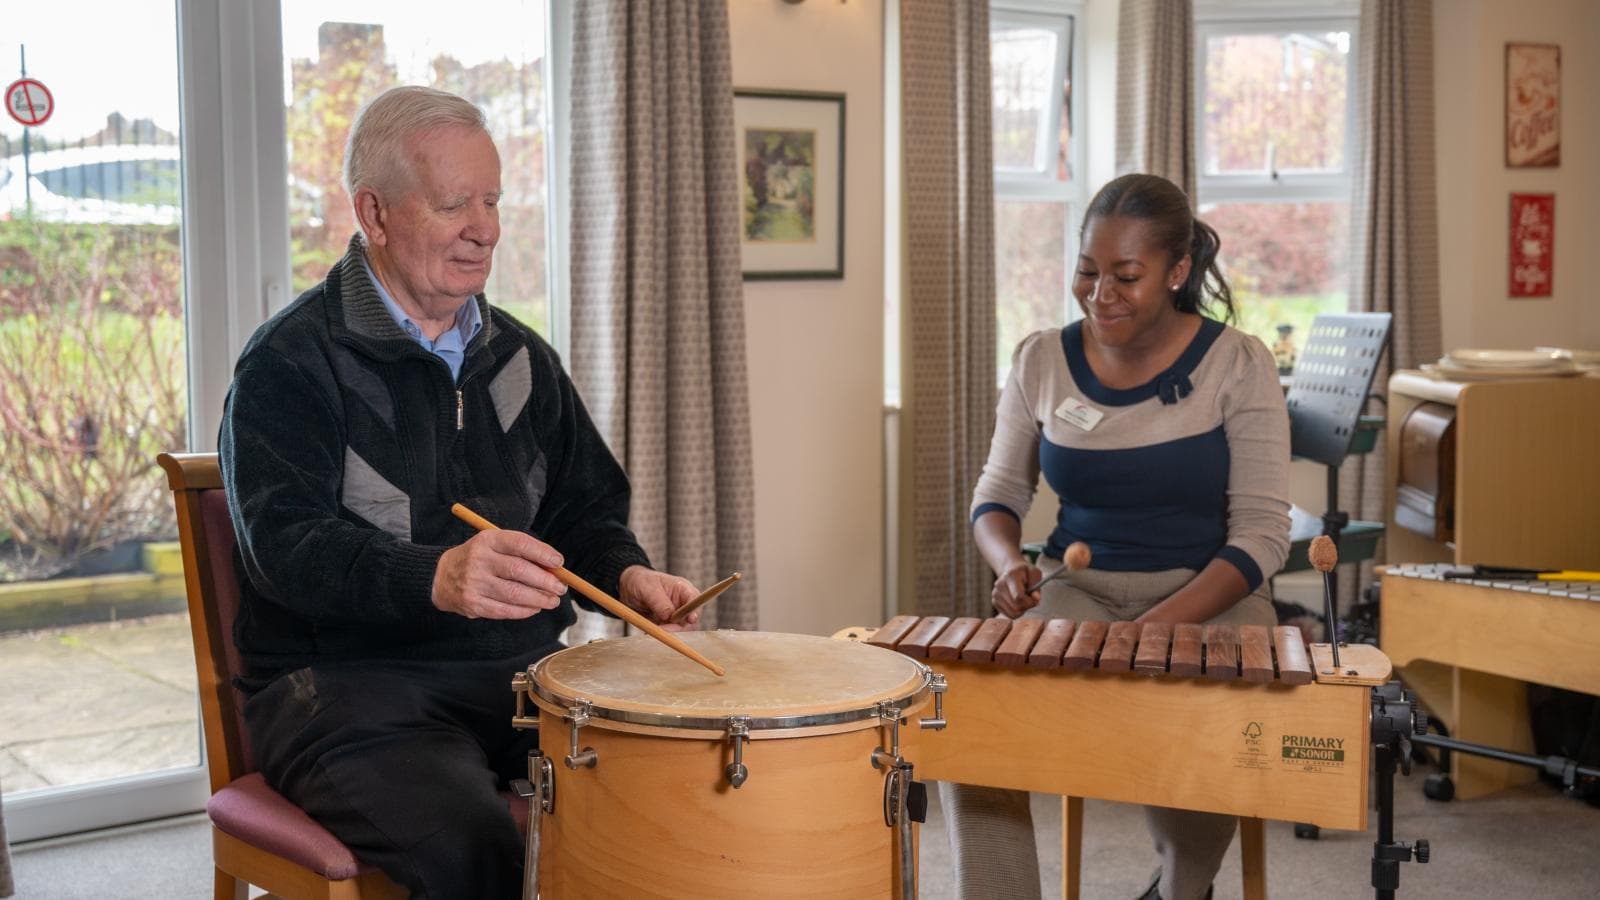 Male resident plays drums whilst music therapist plays xylophone